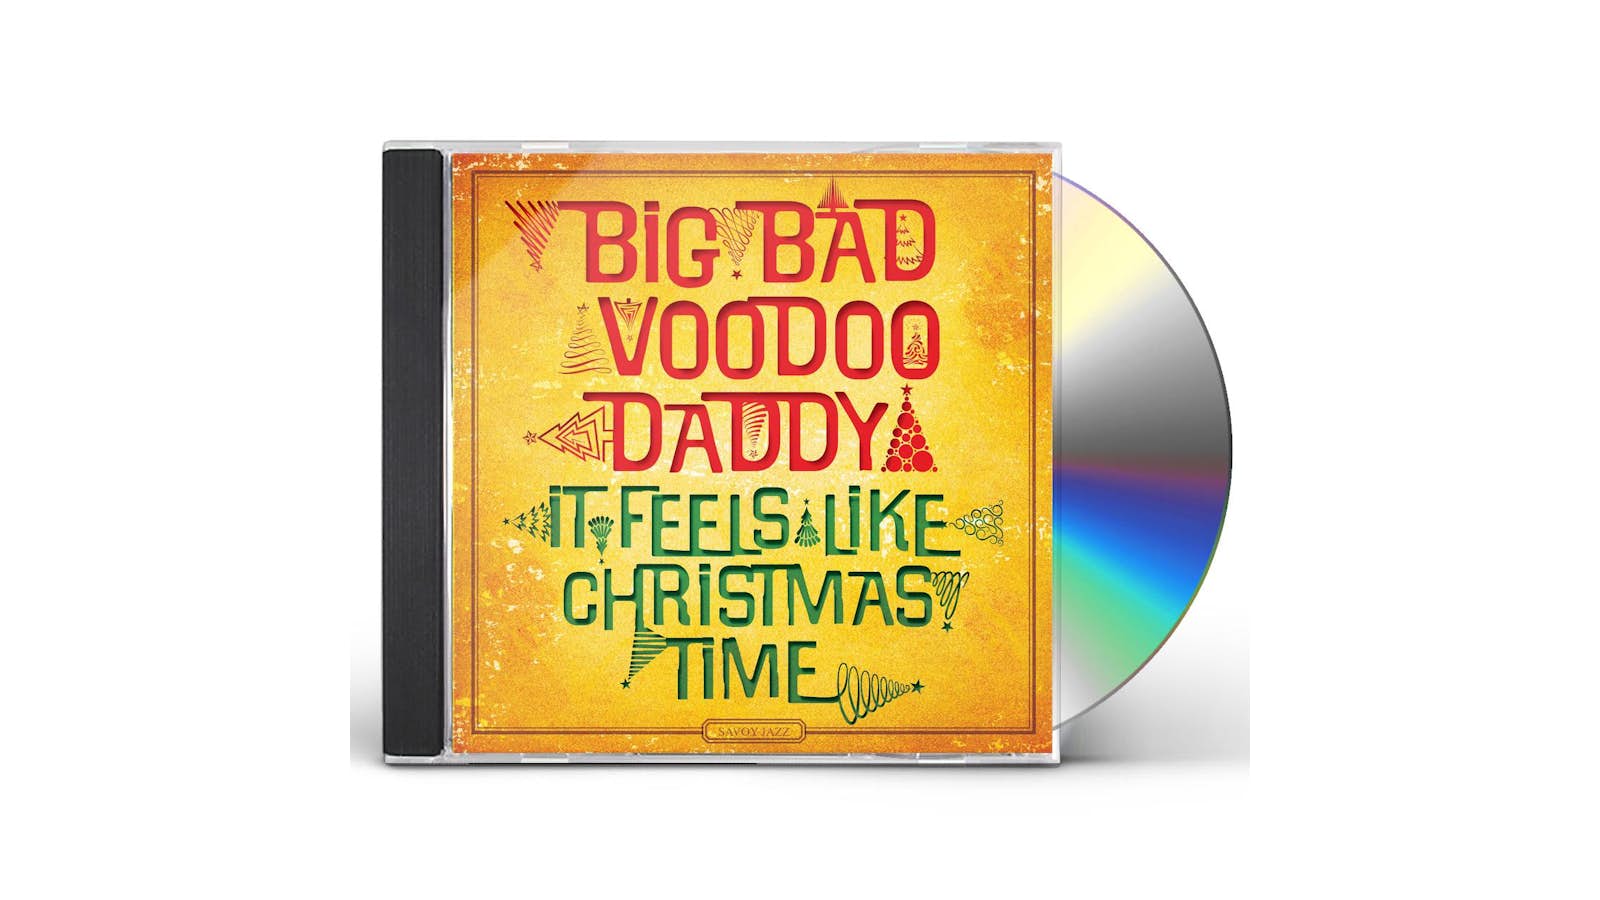 Big Bad Voodoo Daddy Everything You Want For Christmas Vinyl